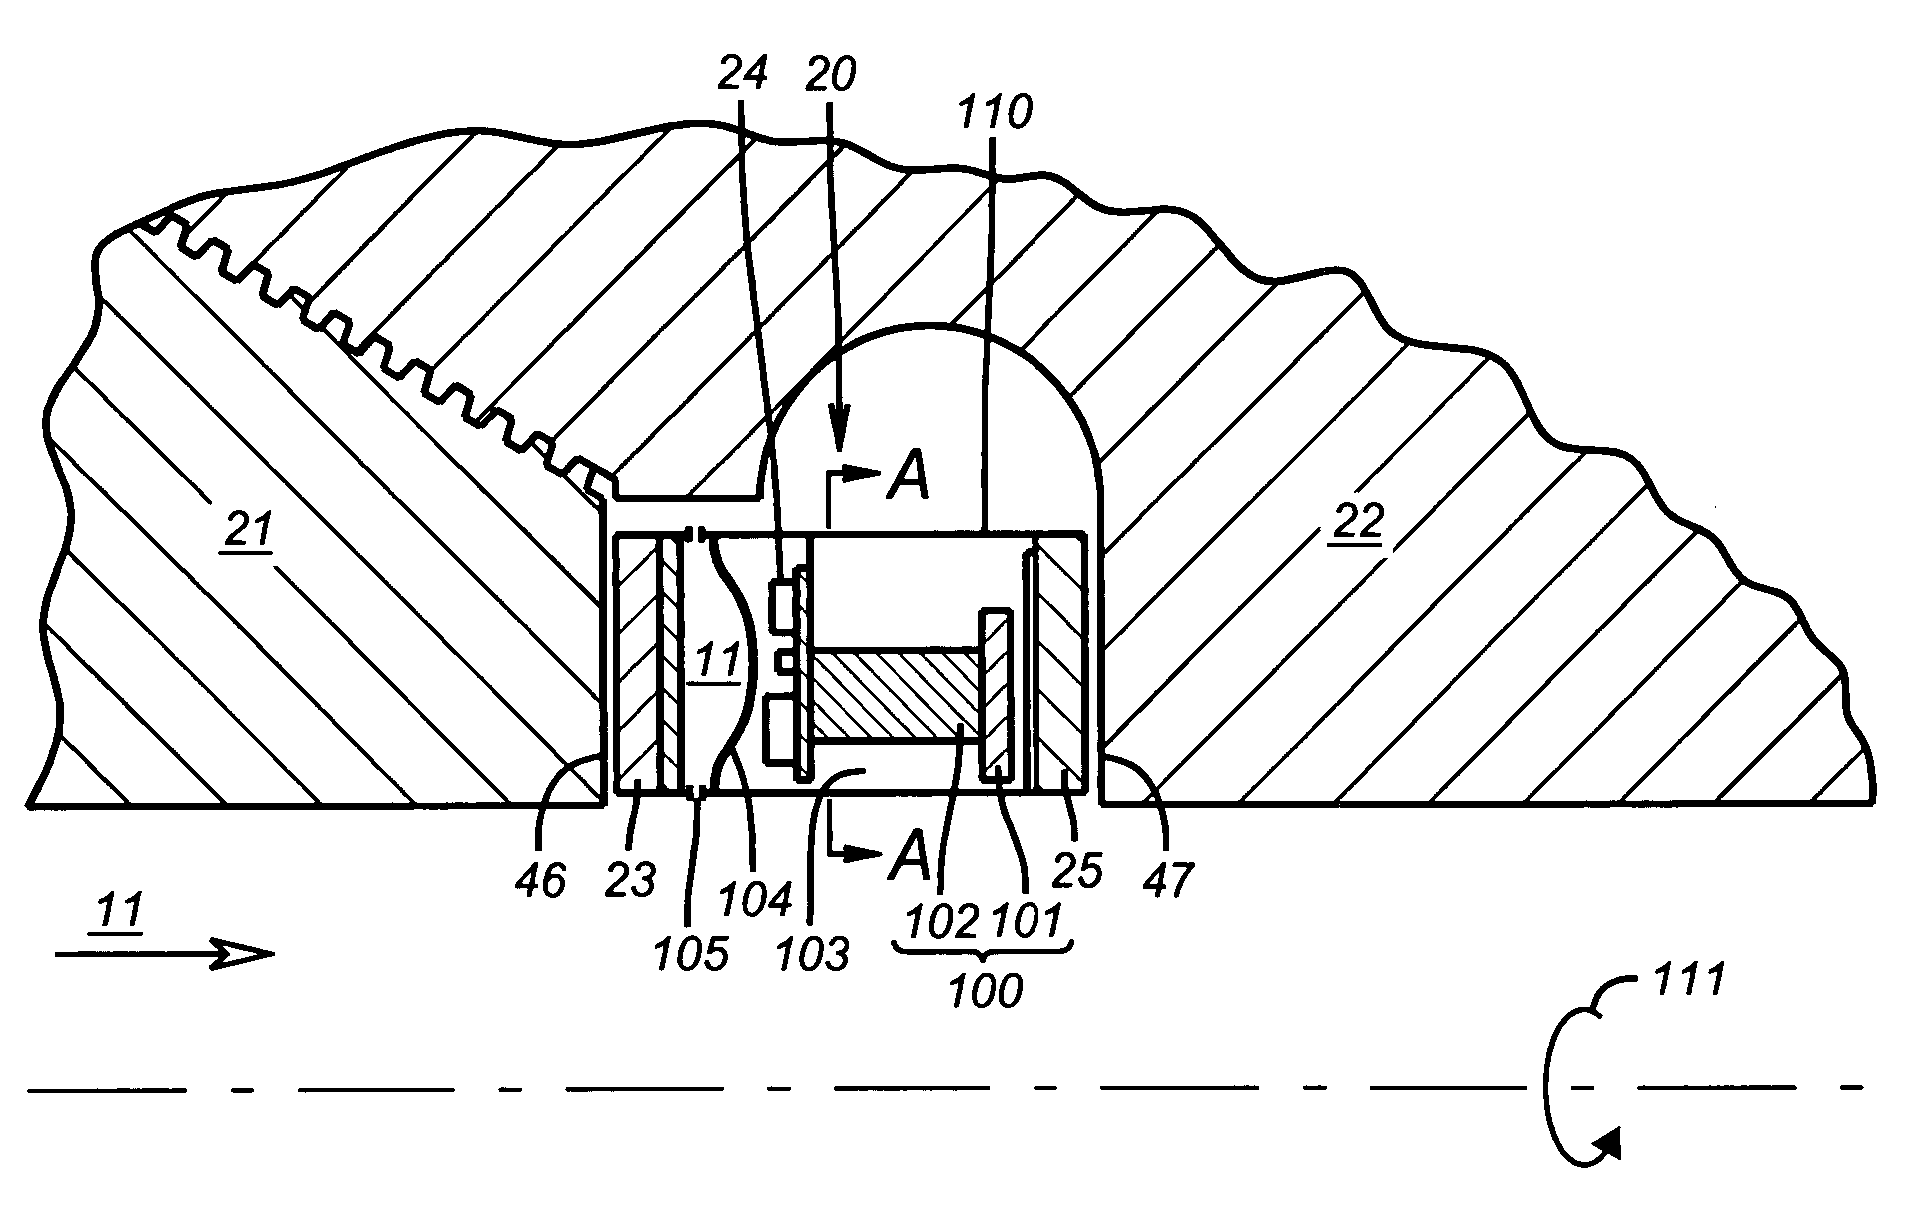 Apparatus and methods for self-powered communication and sensor network